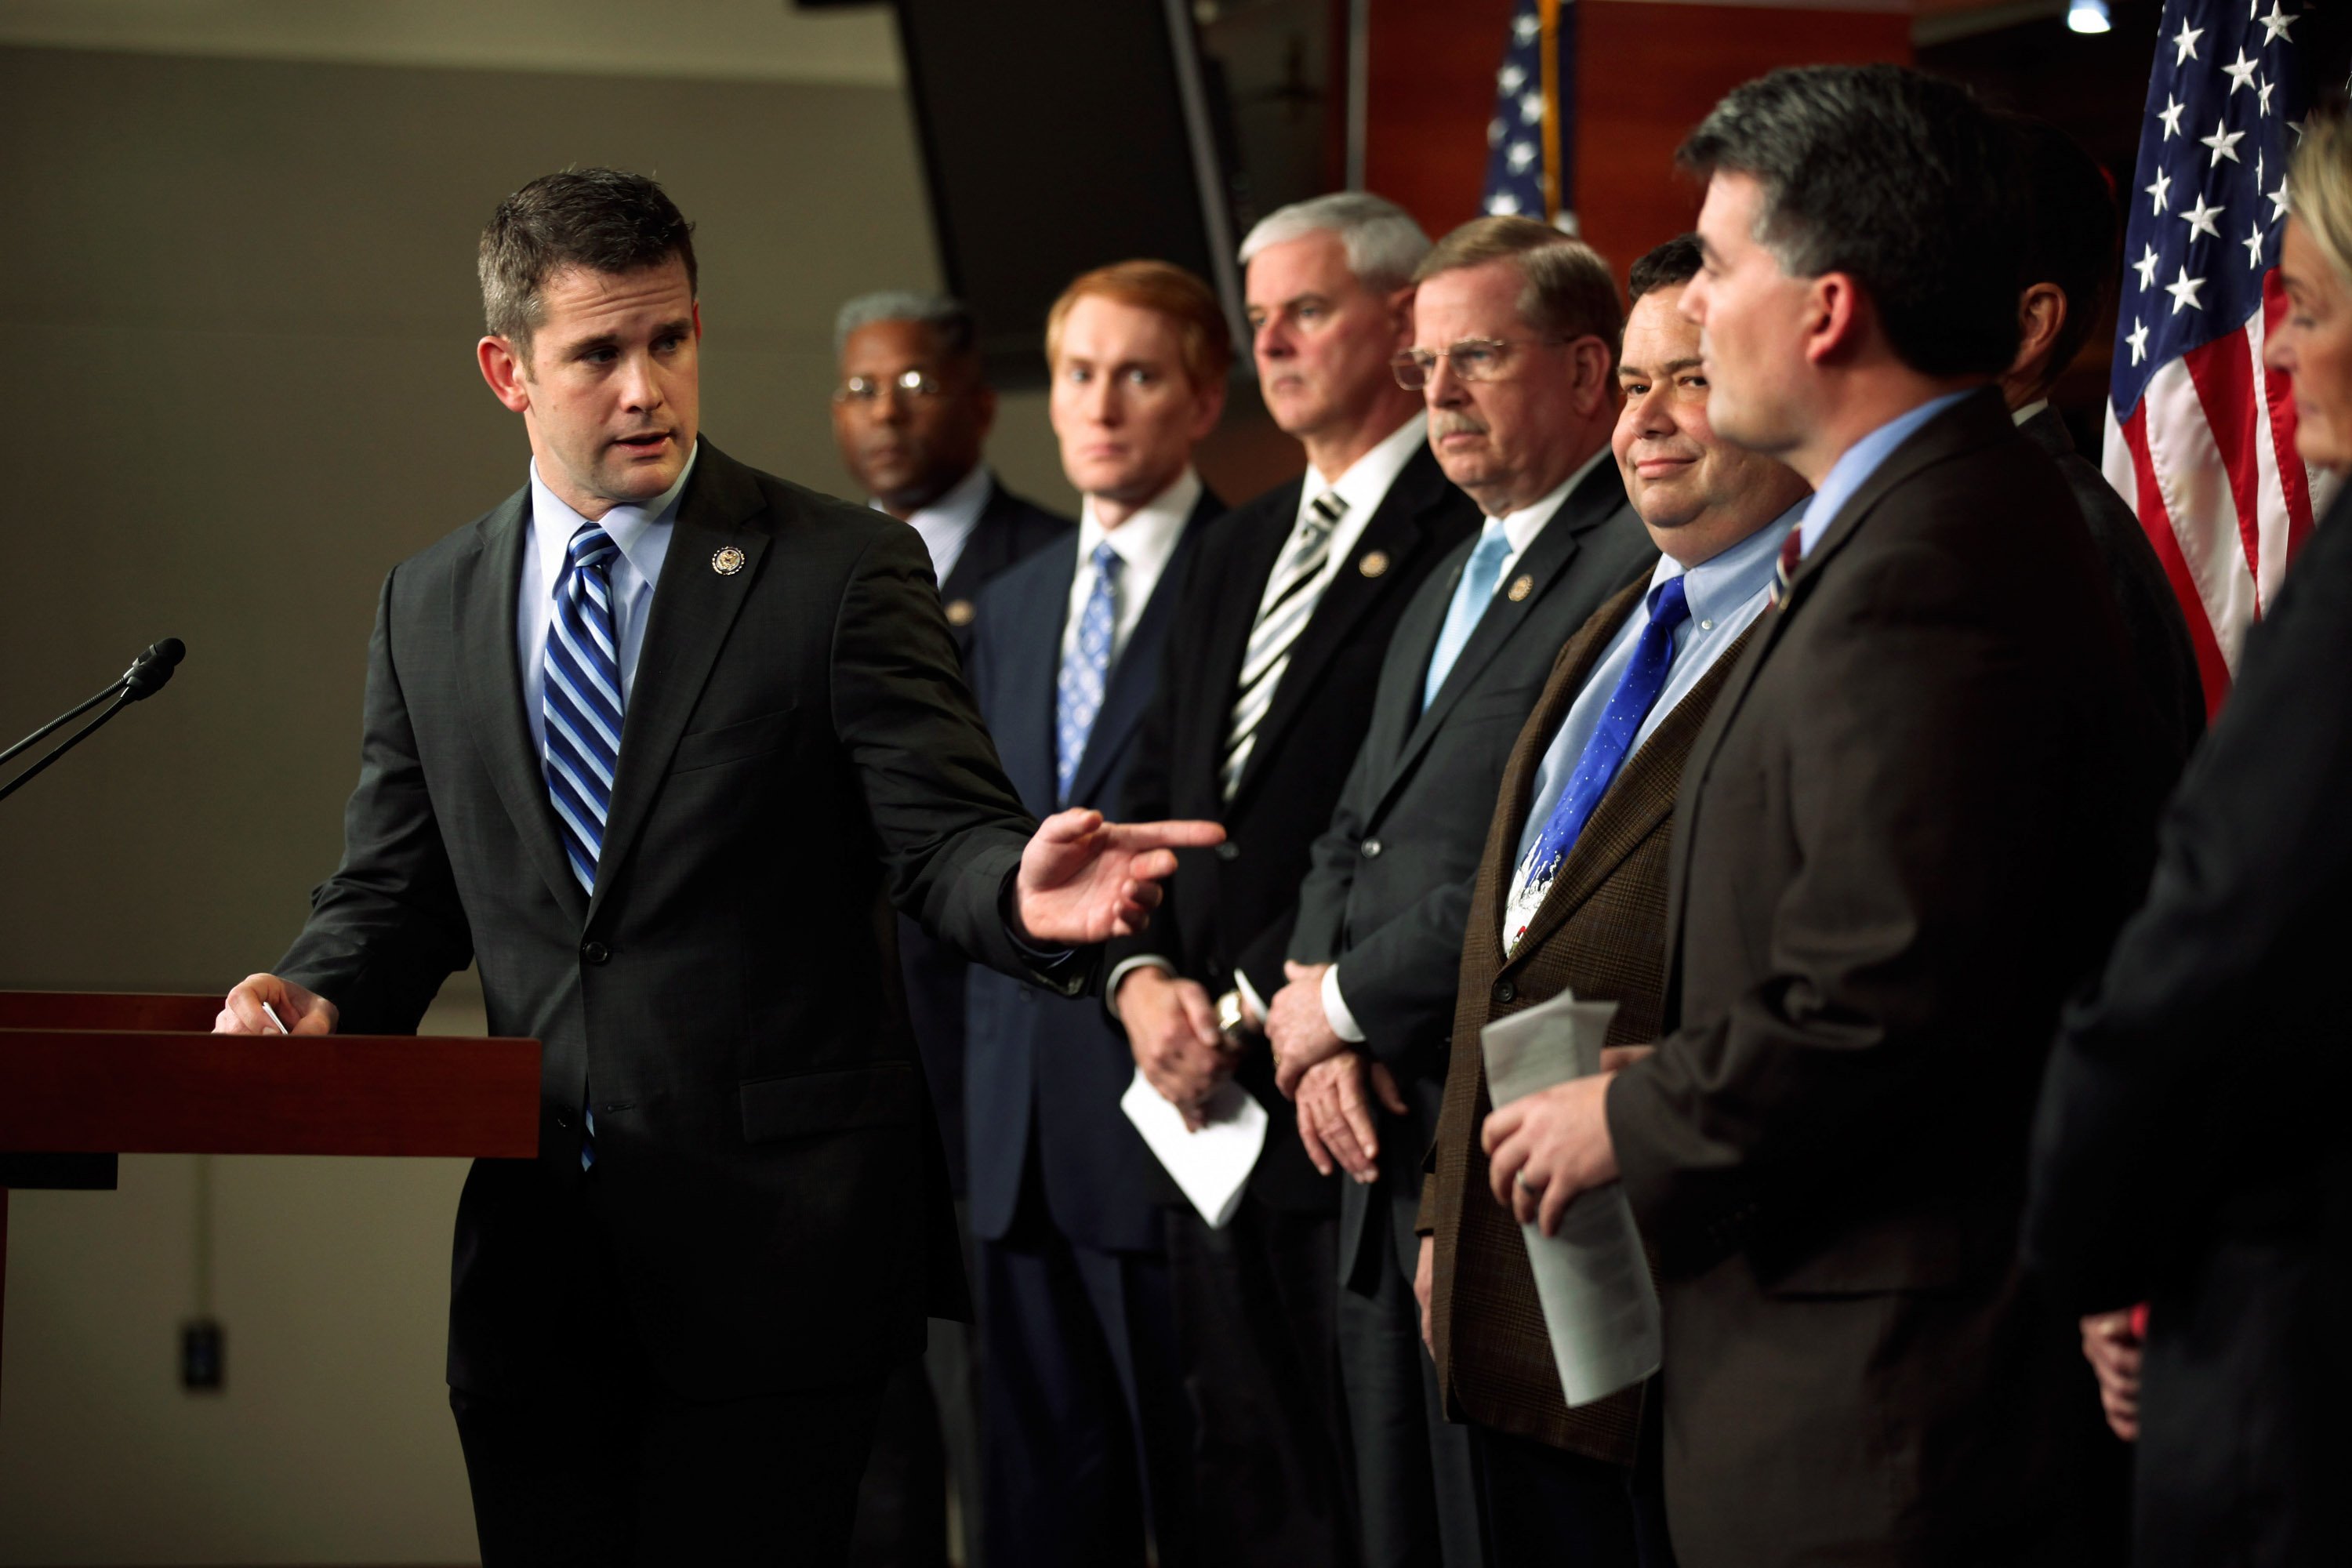 Rep. Adam Kinzinger (R-IL) (L) holds a news conference on the payroll tax vote with fellow House Republican freshmen at the U.S. Capitol December 19, 2011 in Washington, DC. (Photo by Chip Somodevilla/Getty Images)